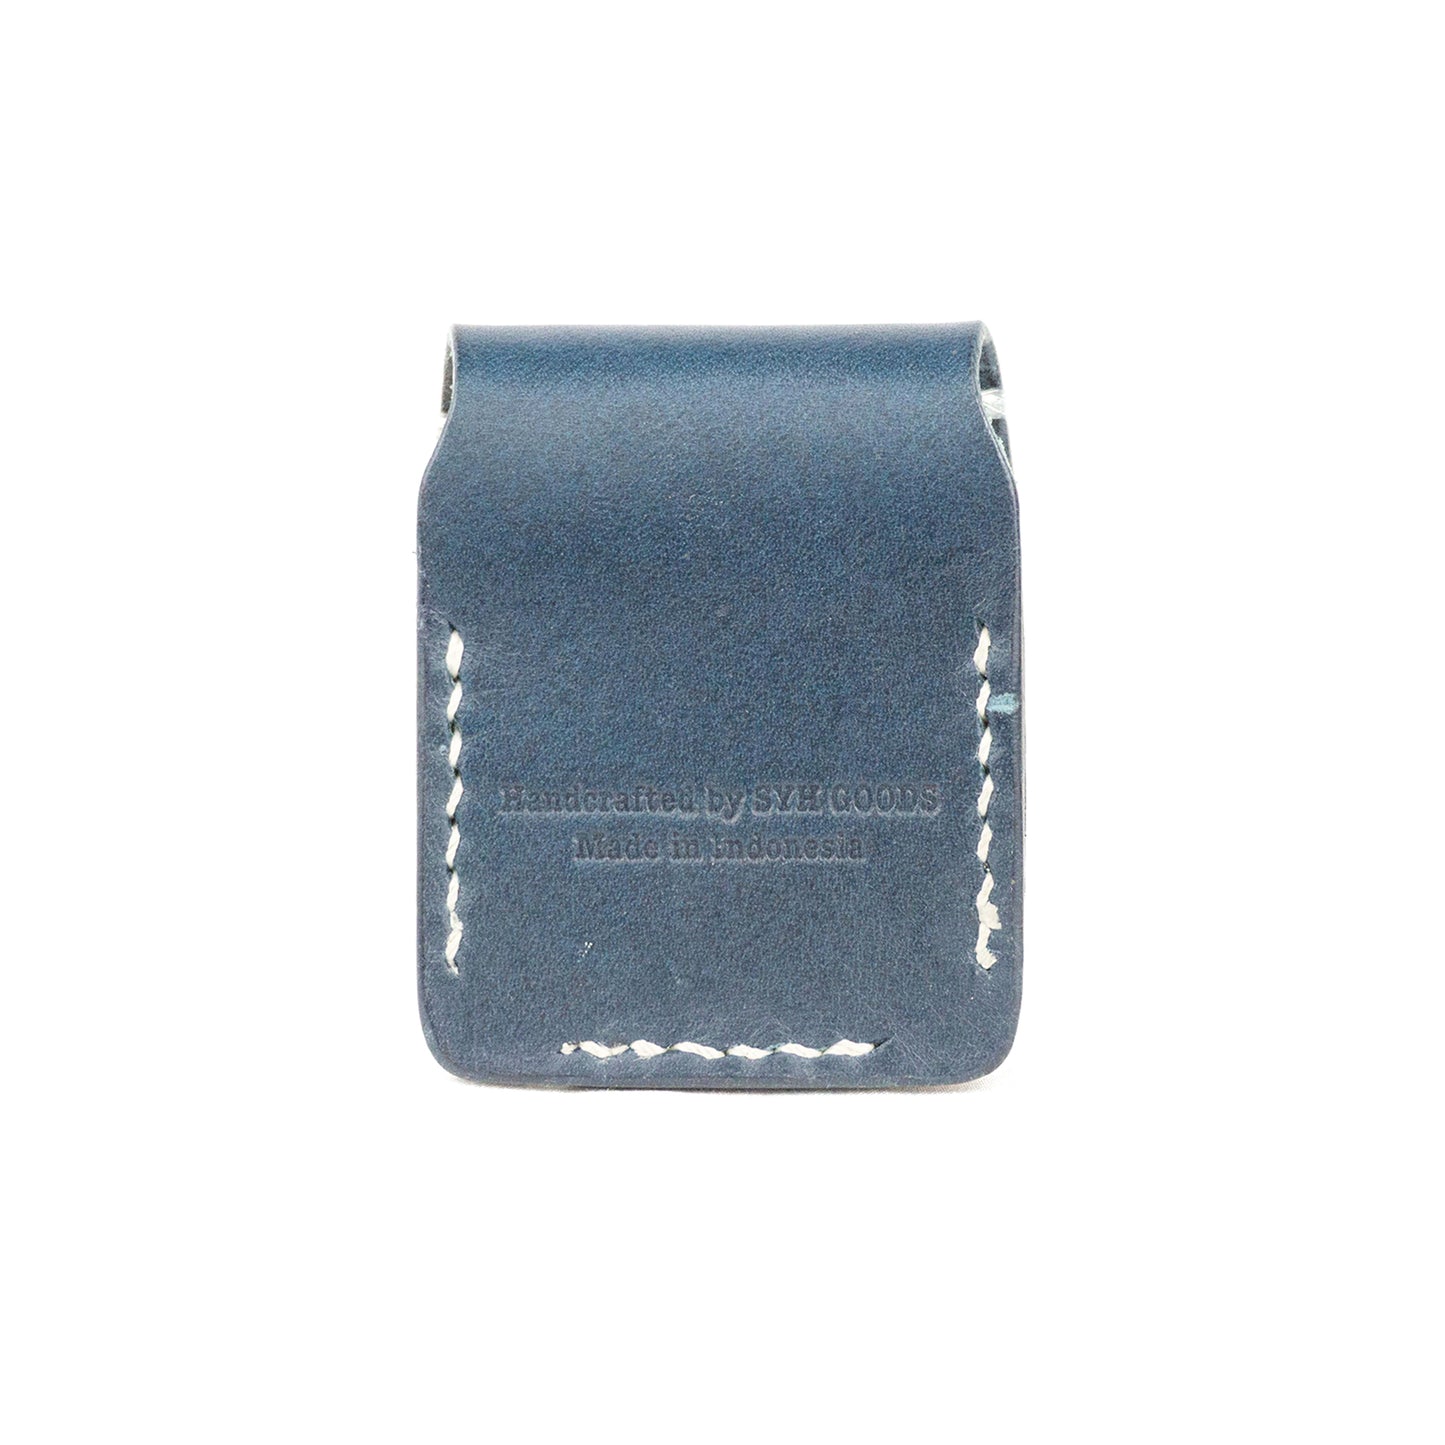 SYH ZIPPO LEATHER CASE BLUE